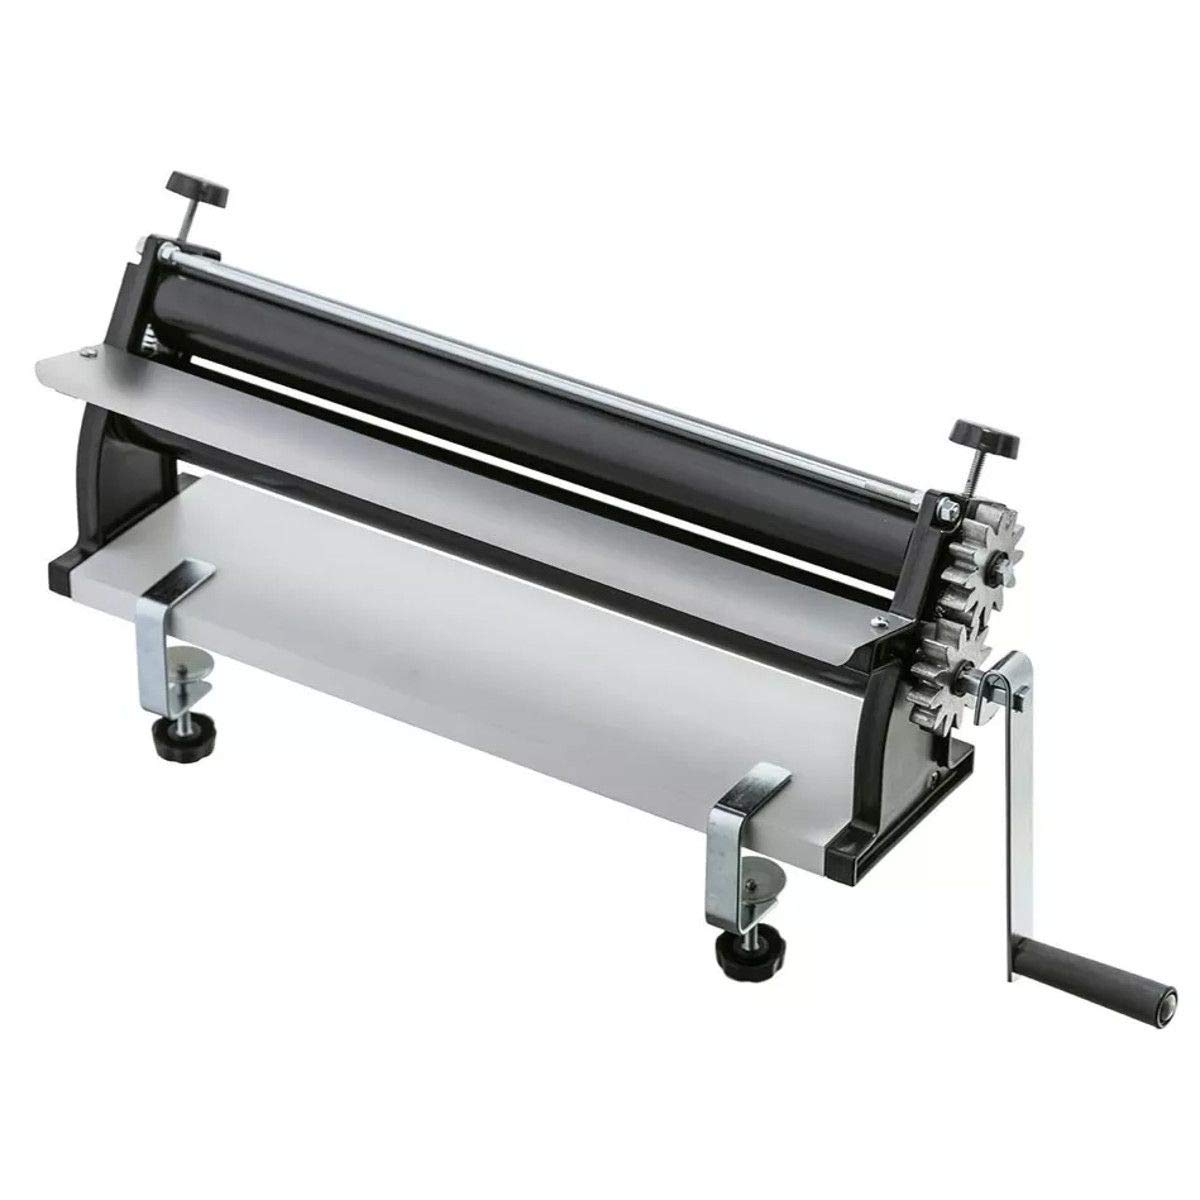 DKN 19-Inch Pizza Dough Roller Machine with Hand Crank - Pasta Maker, Dough Sheeter Features Non-Stick Rollers with Thickness Control - Solid Steel and Aluminum Construction